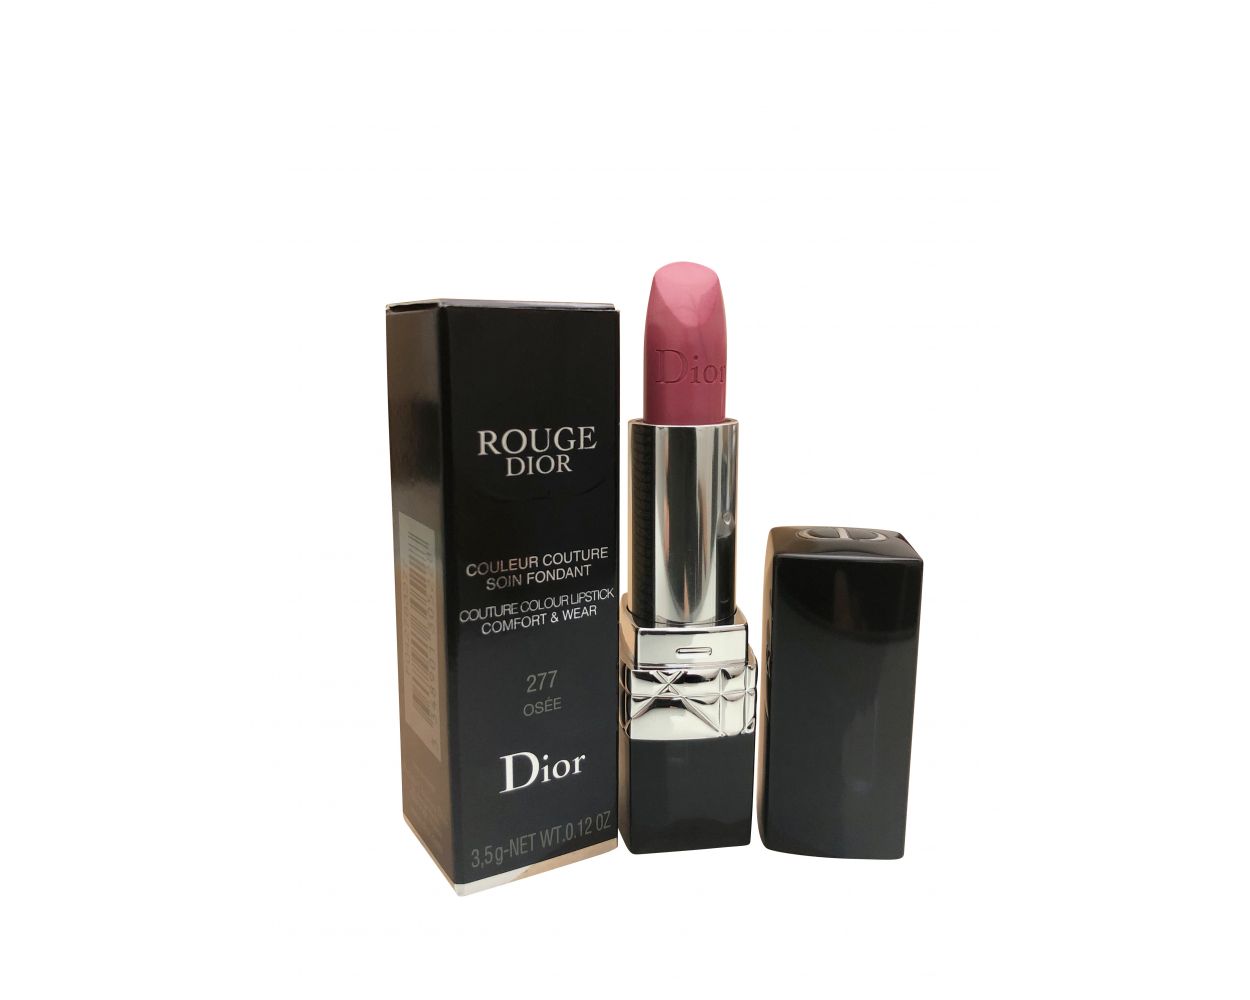 rouge dior 277 osee